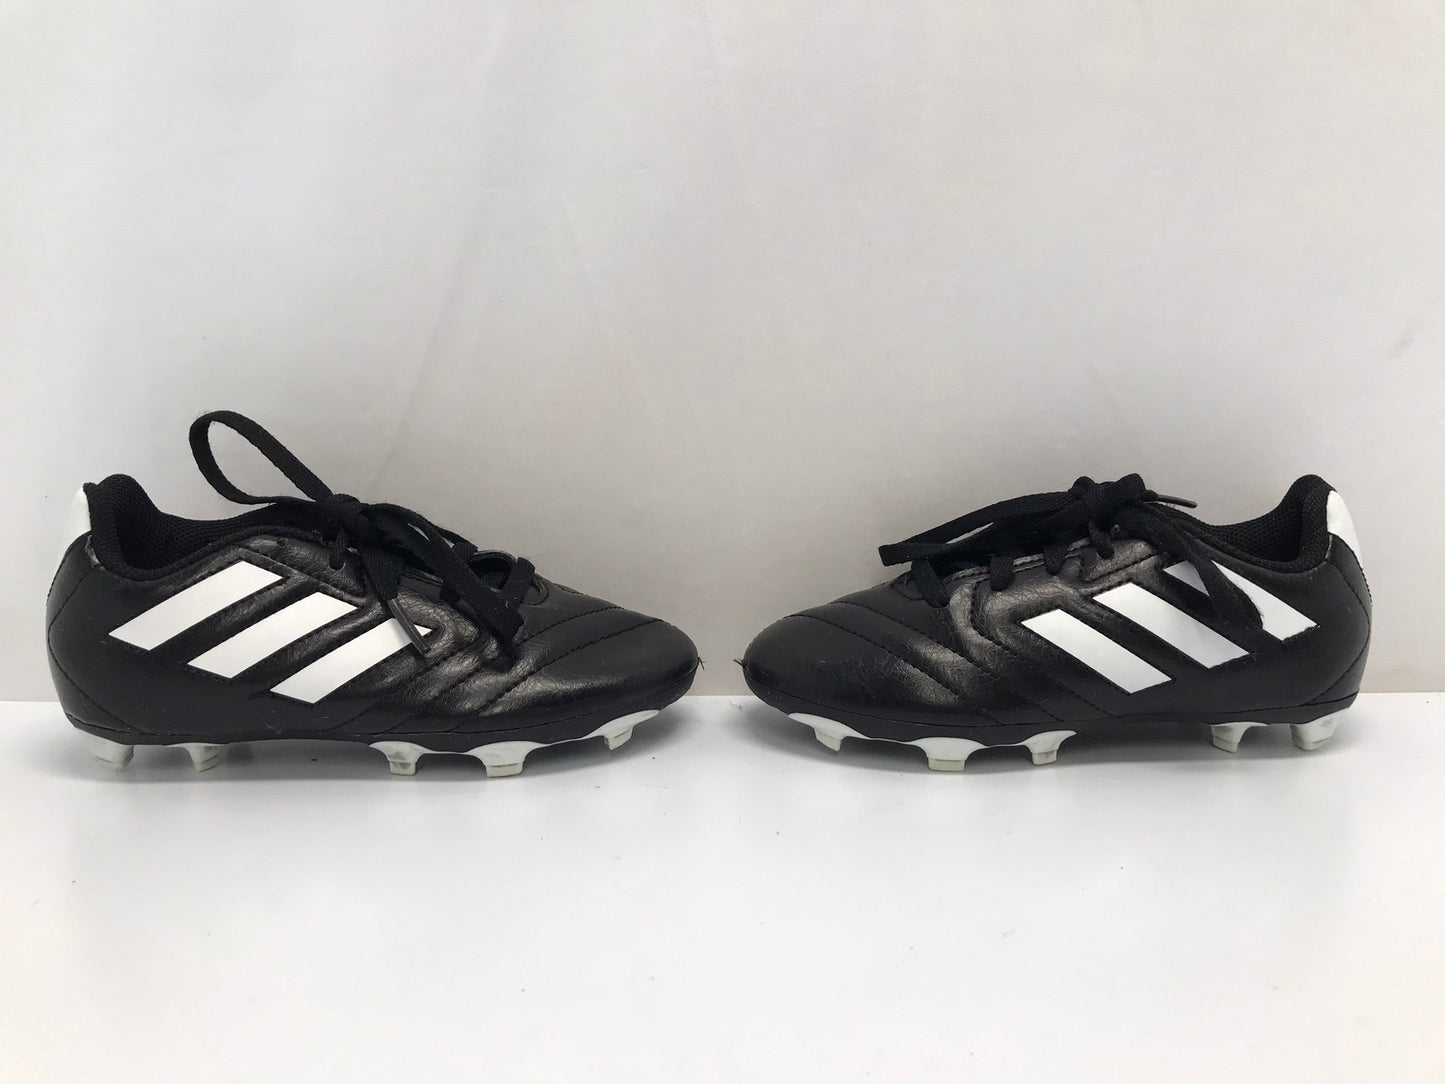 Soccer Shoes Cleats Child Size 12 Adidas Black White Excellent